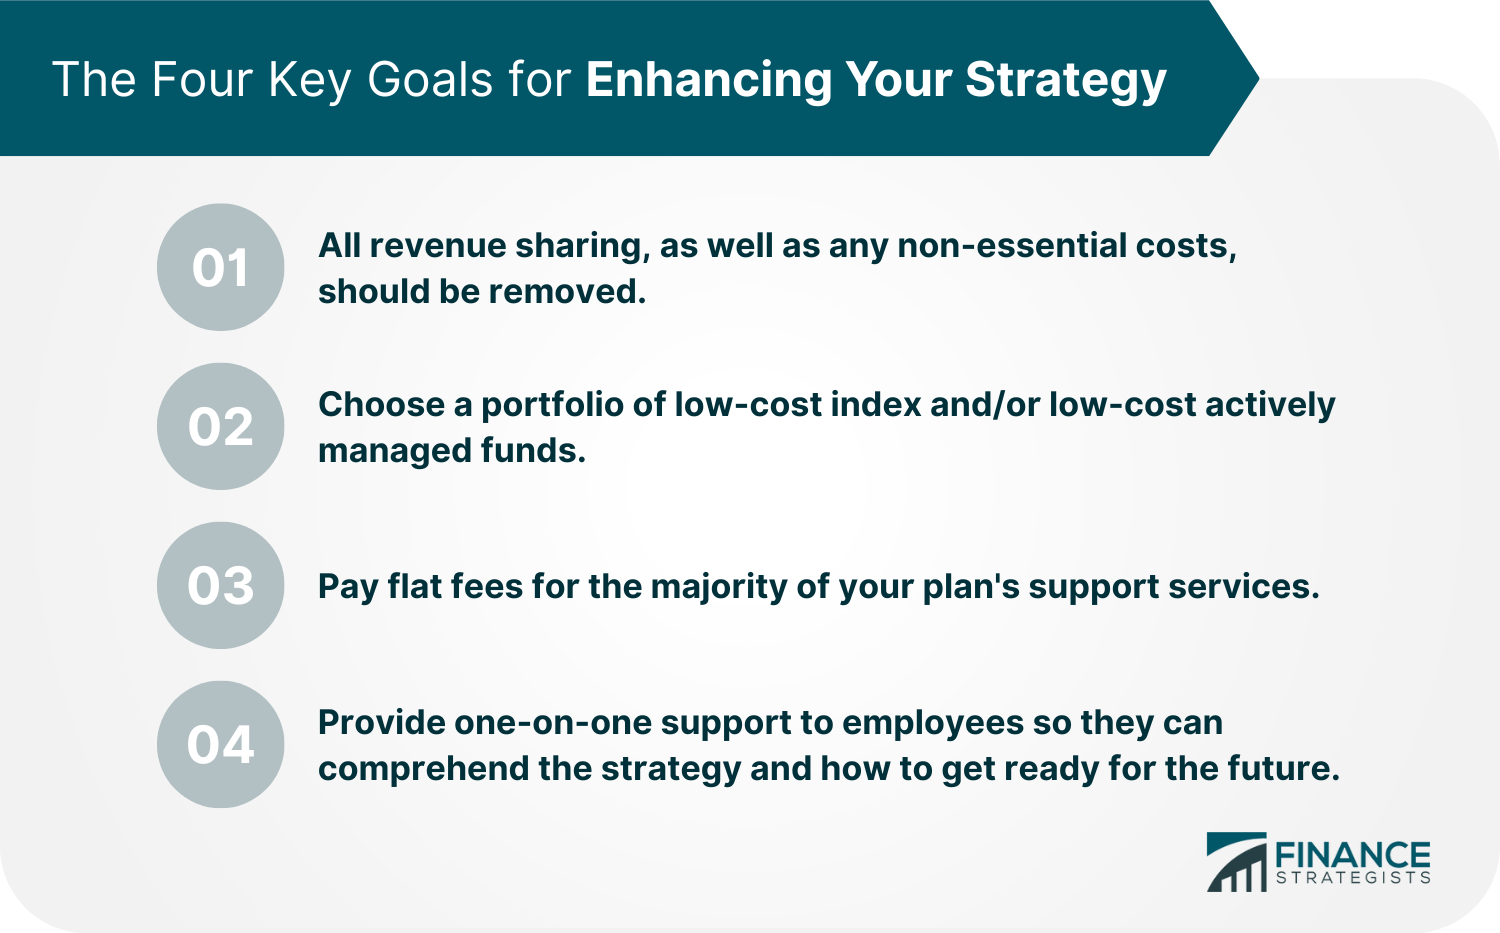 The Four Key Goals for Enhancing Your Strategy